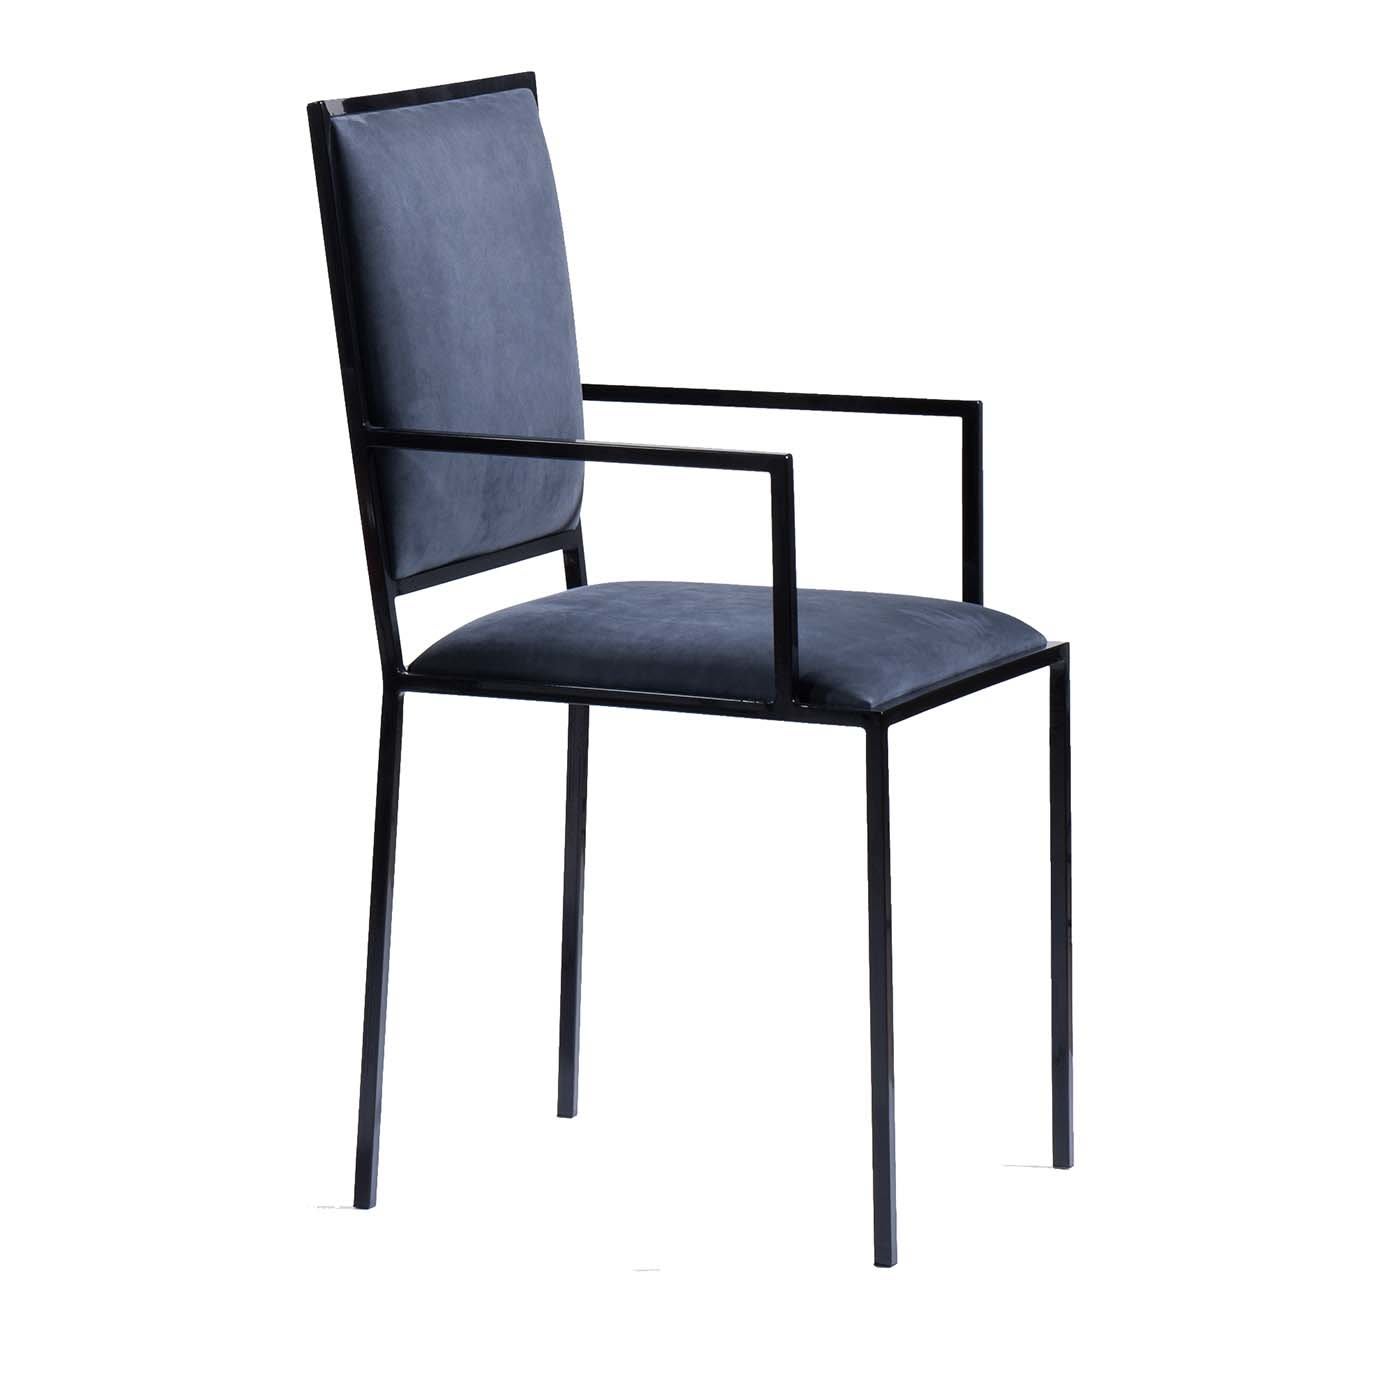 The Simple Chair with Armrests in Royal Blue - B.B. for Reschio